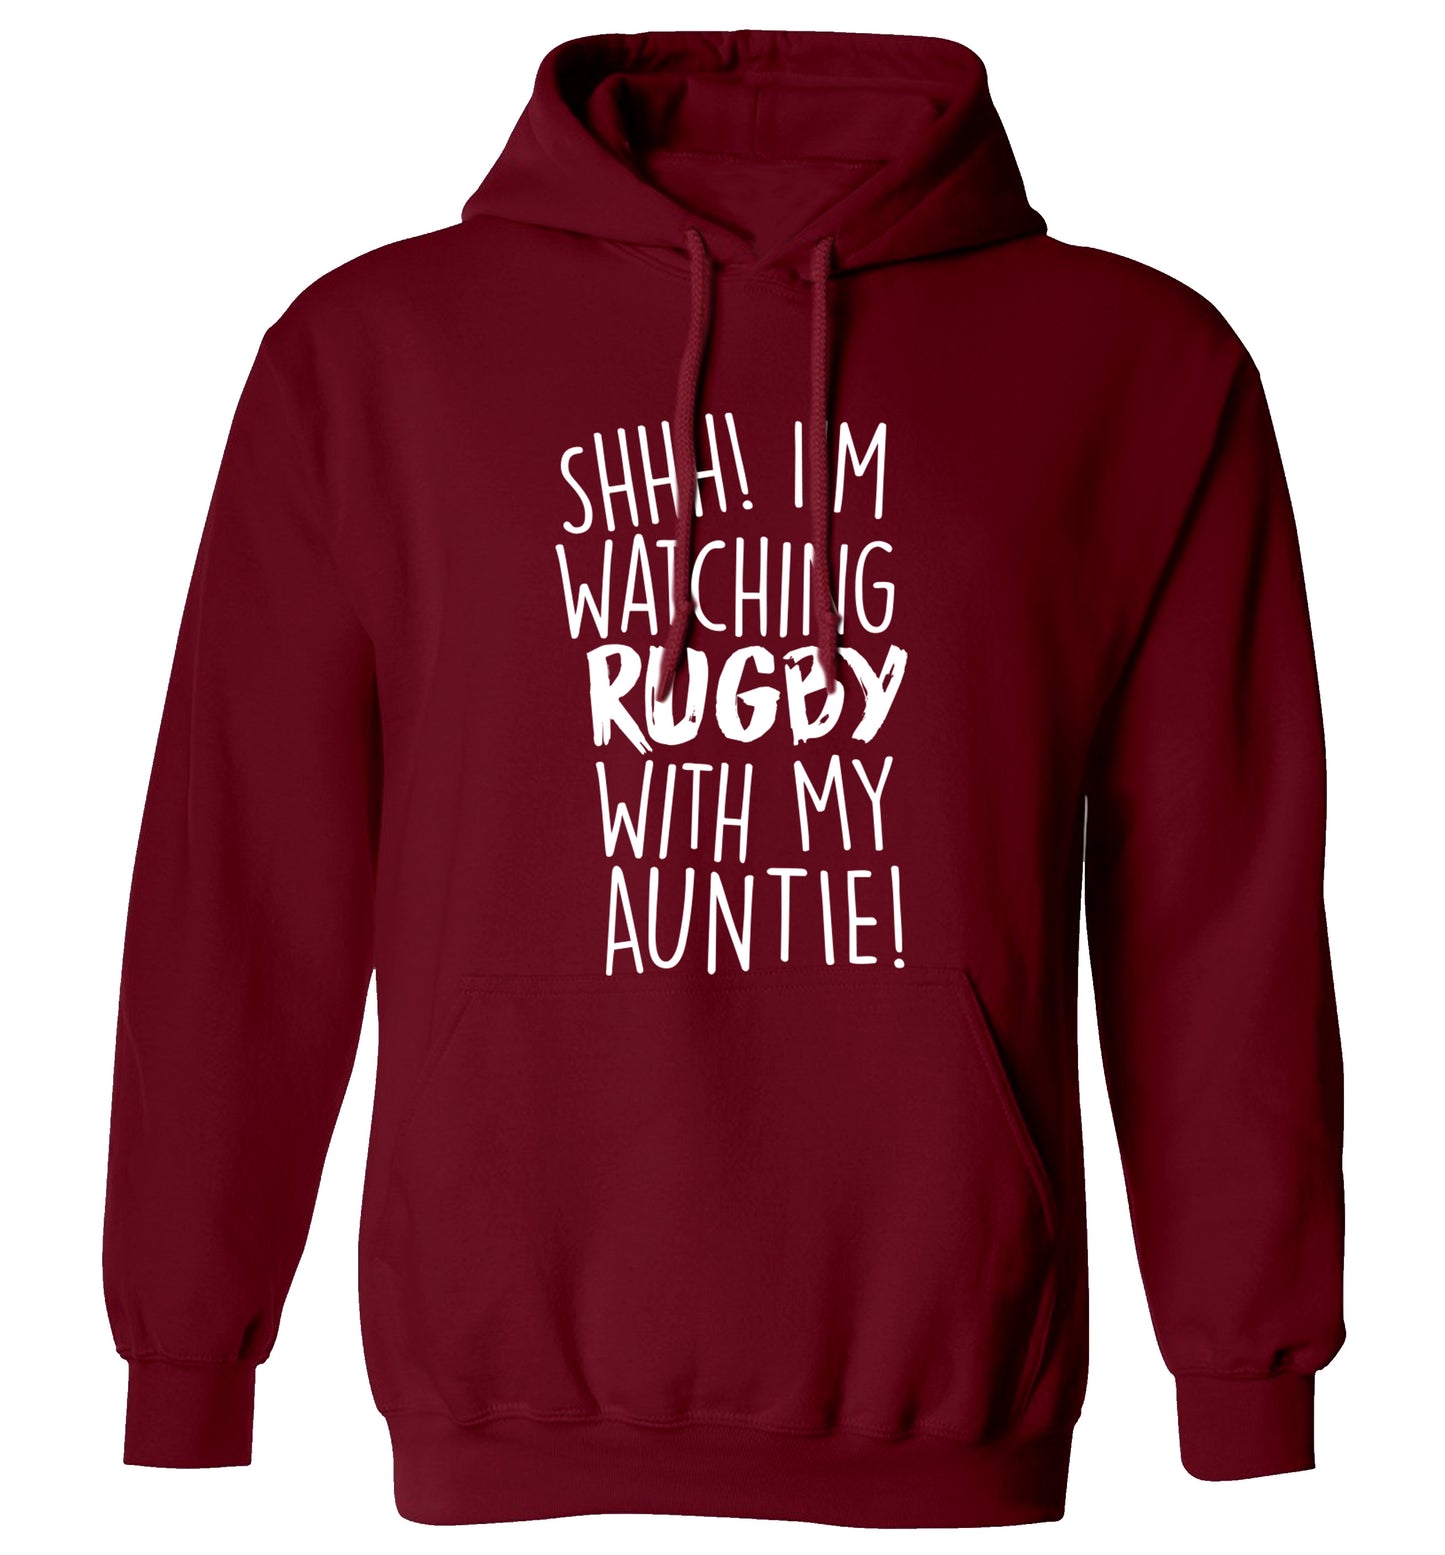 Shhh I'm watchin rugby with my auntie adults unisex maroon hoodie 2XL